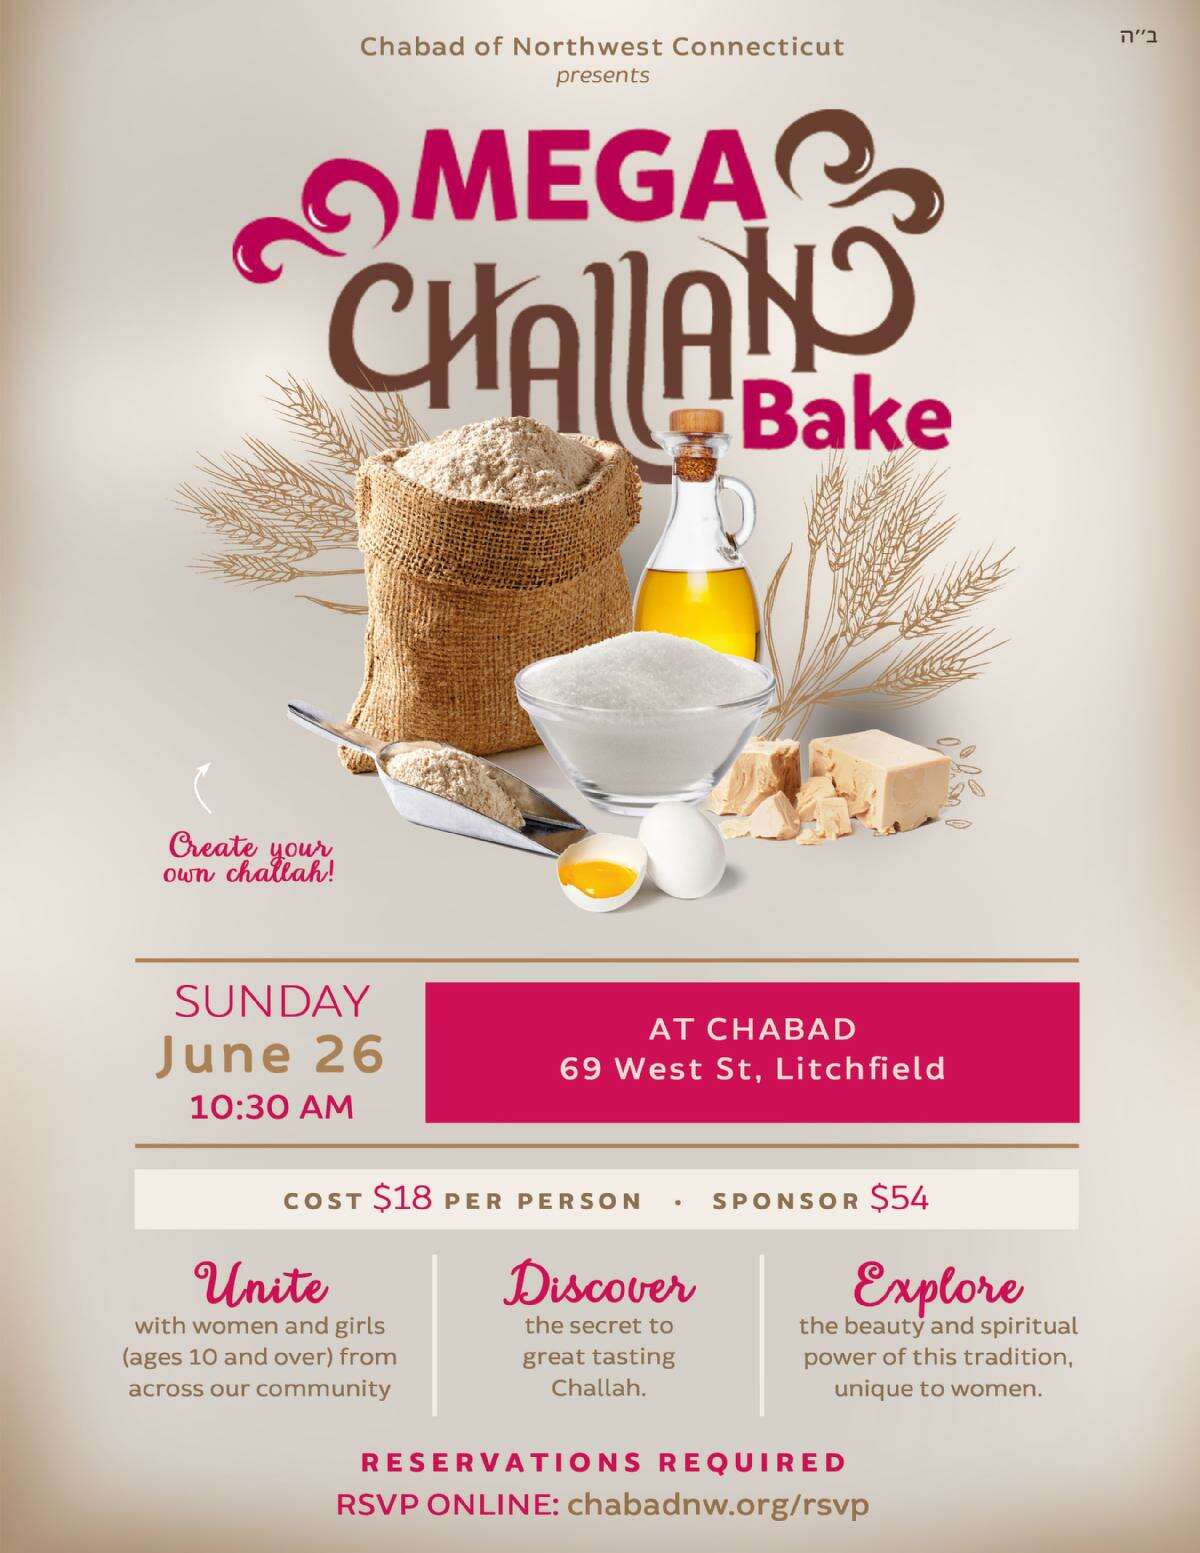 A Mega Challah Bake will be held at 10:30 a.m. June 26 at Chabad, 69 West St.,Litchfield.